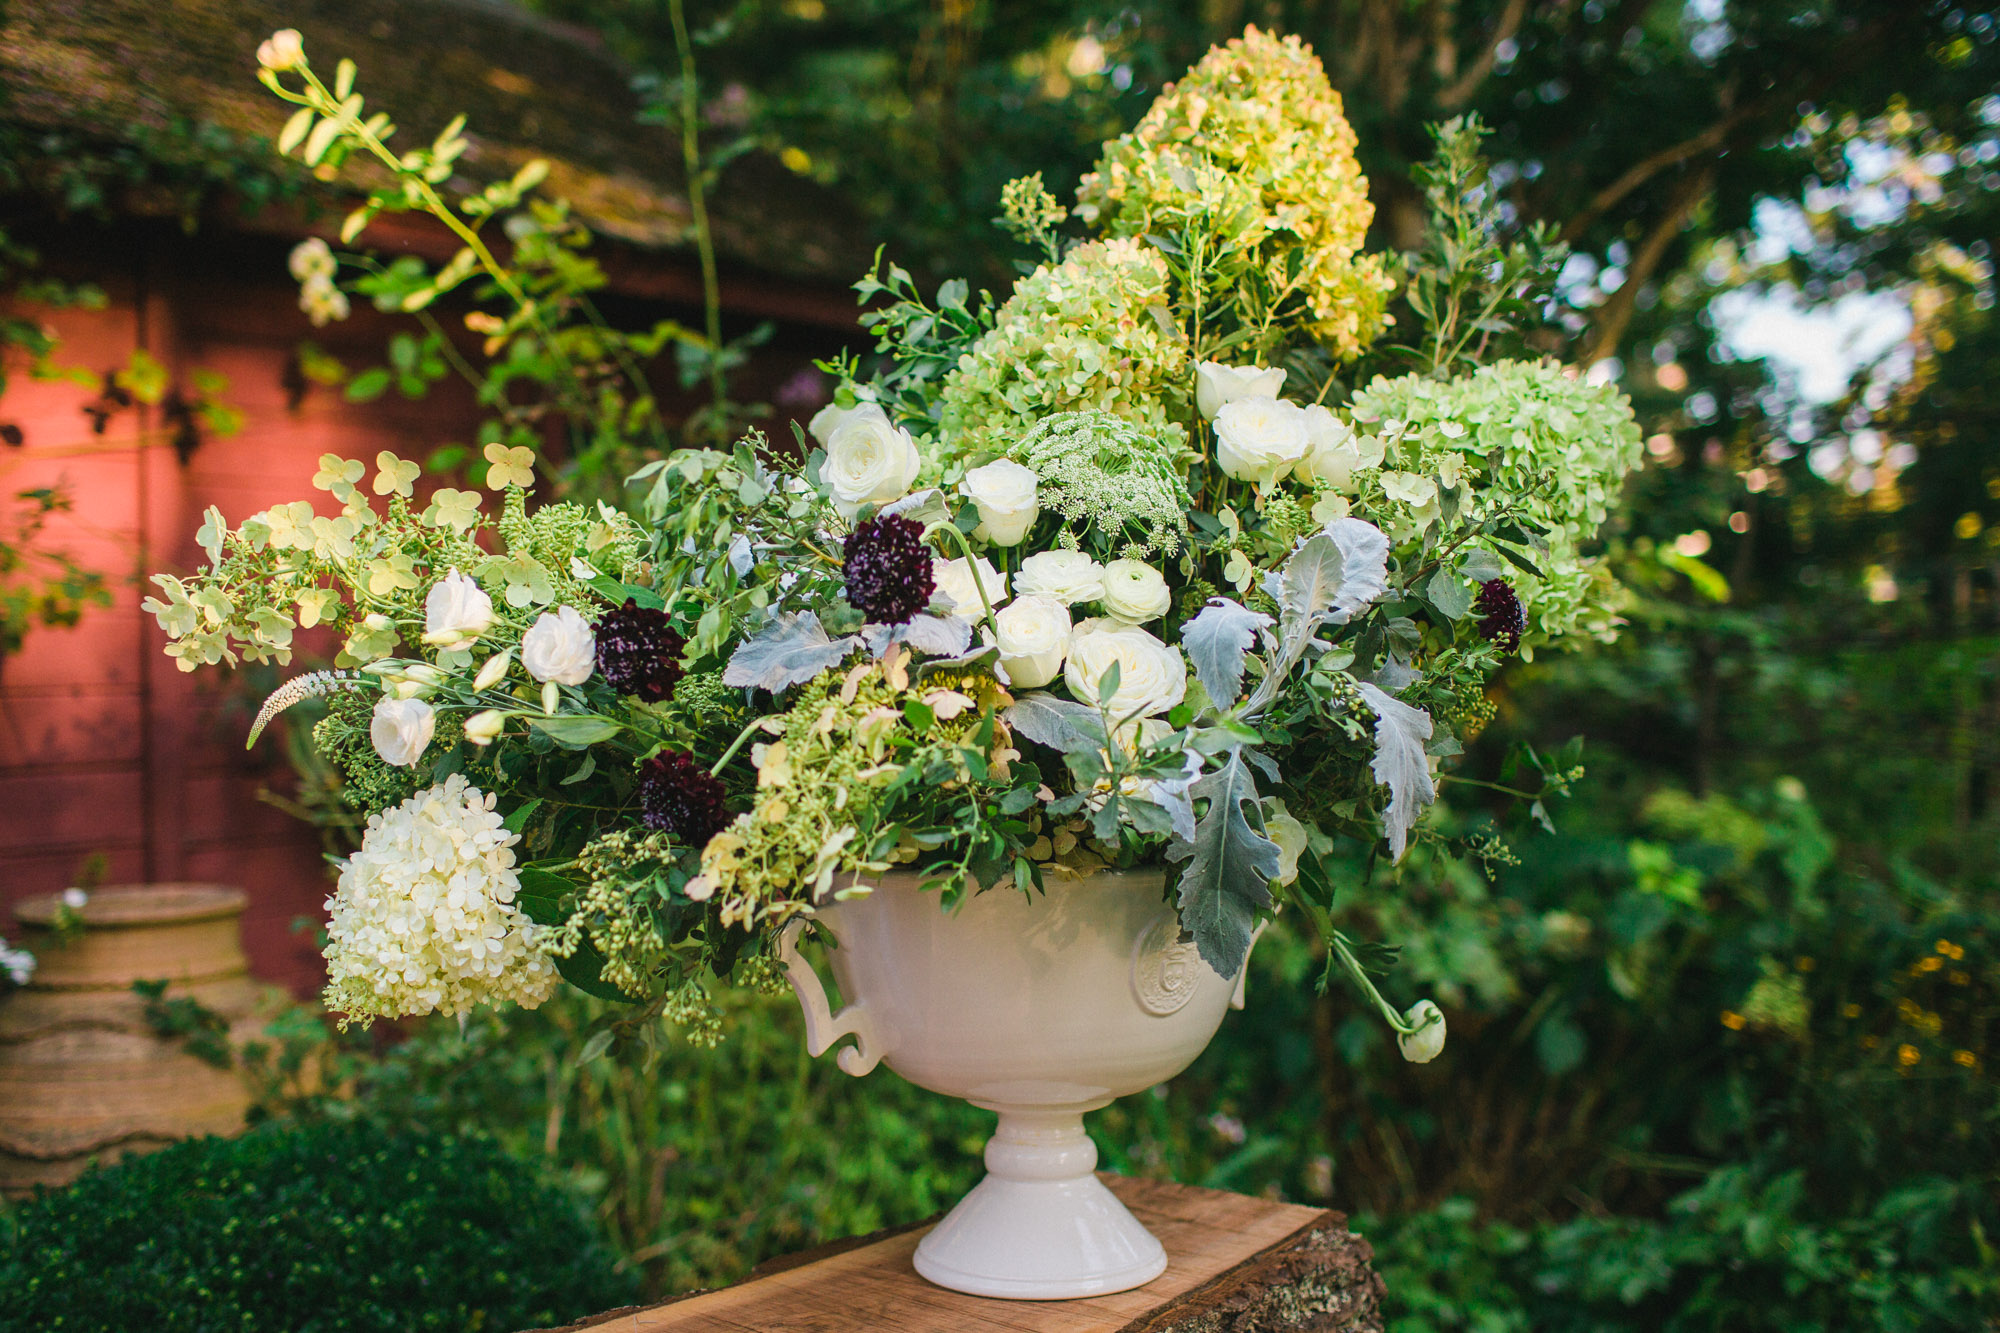 You might want to hire a professional wedding photographer reason 38: Artful photo of a floral arrangement.